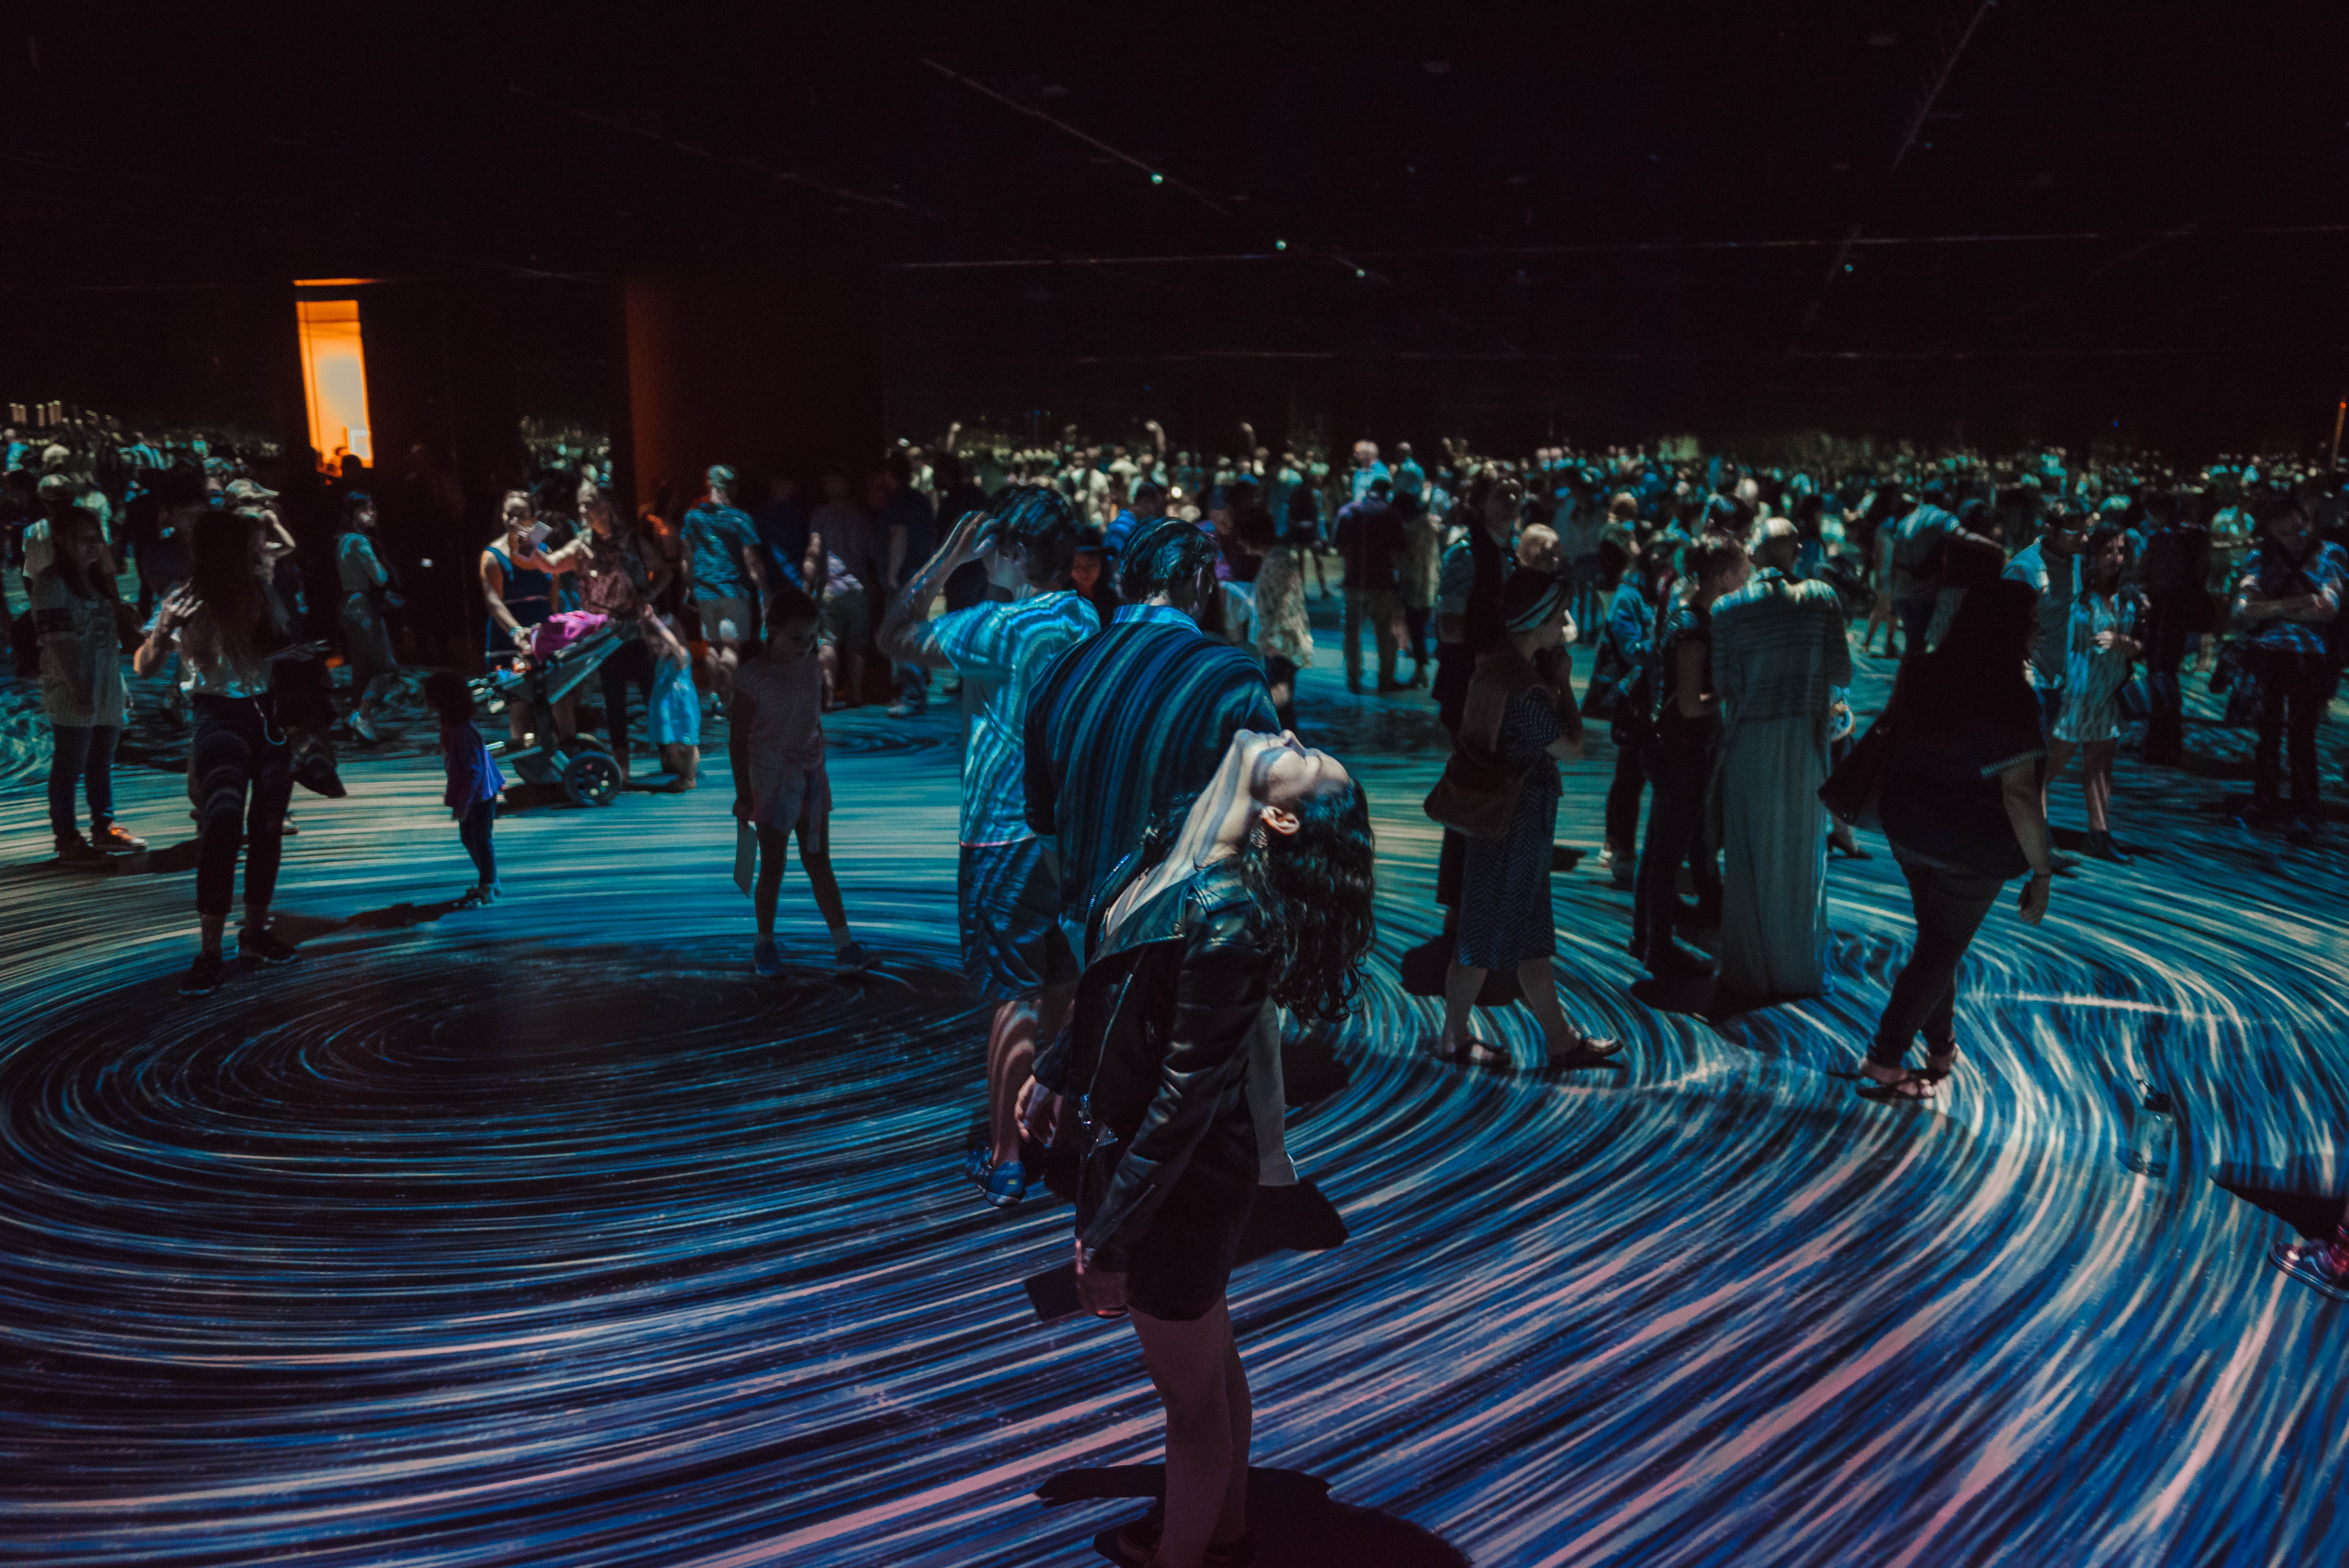 woman standing in the middle of a large image projection on the floor